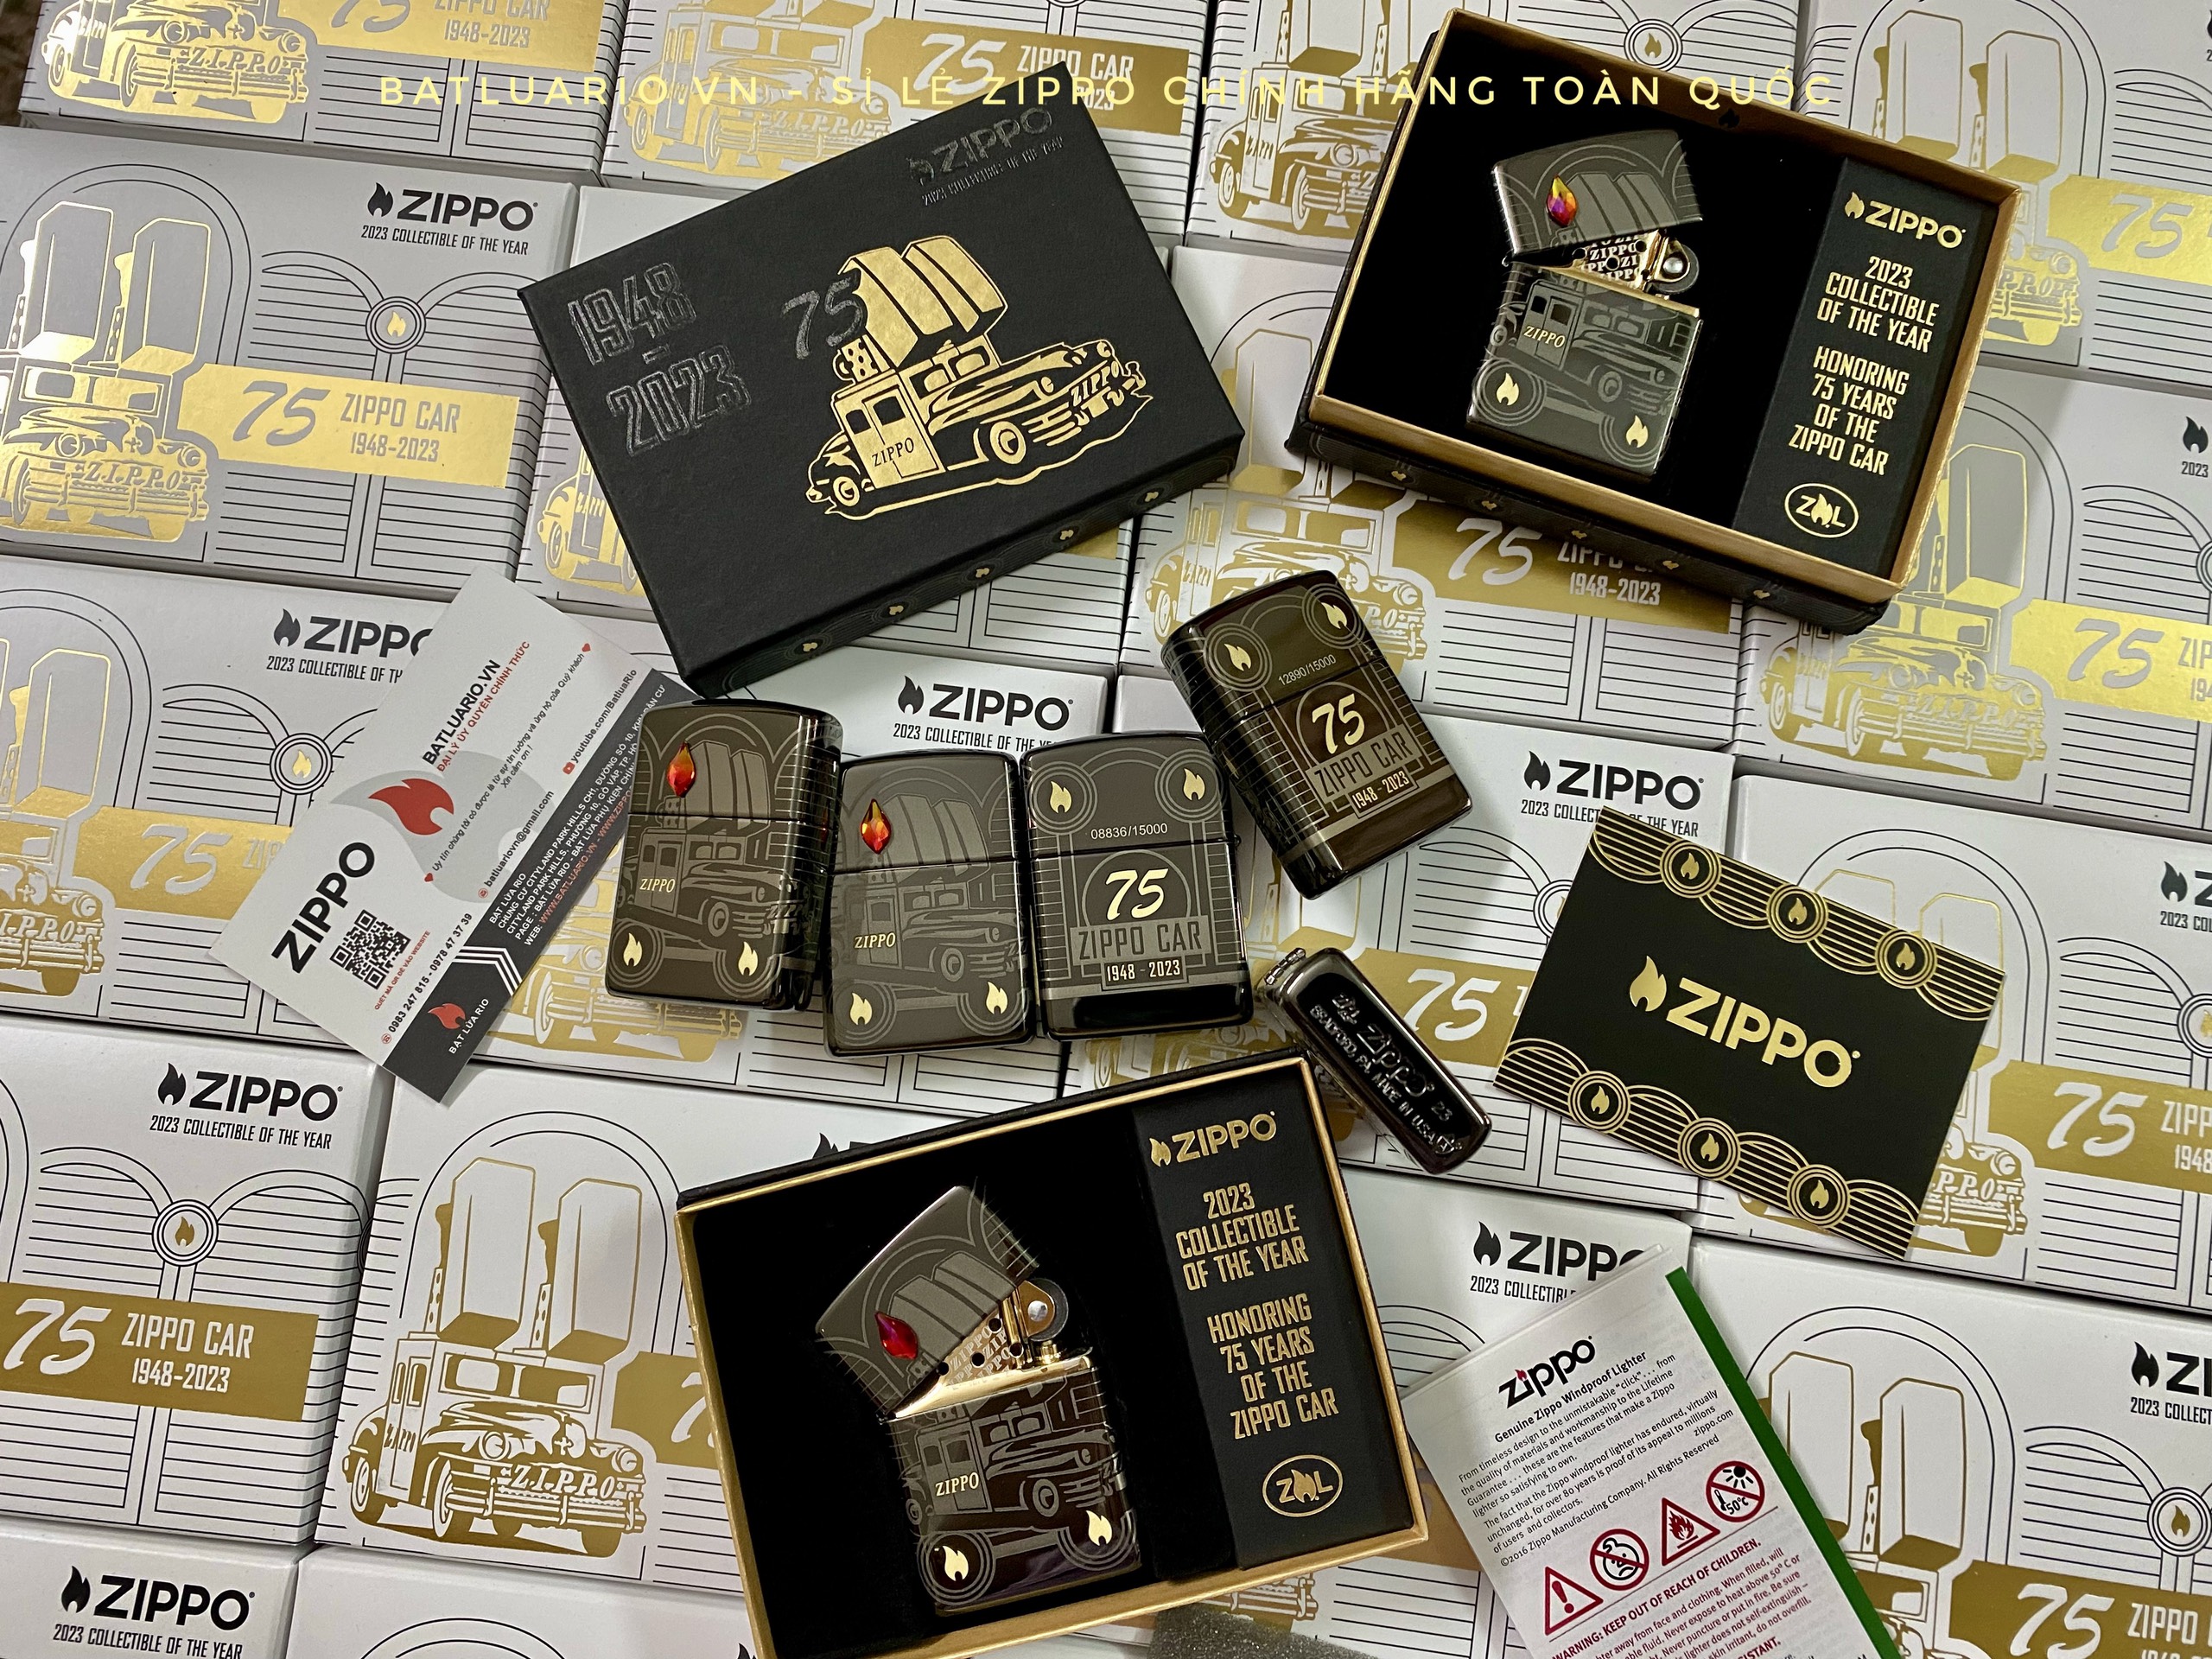 Zippo 48692 - Zippo 2023 Collectible Of The Year - Zippo Car 75th Anniversary Asia Pacific Limited Edition - Zippo COTY 2023 - Honoring 75 Years Of The Zippo Car 25